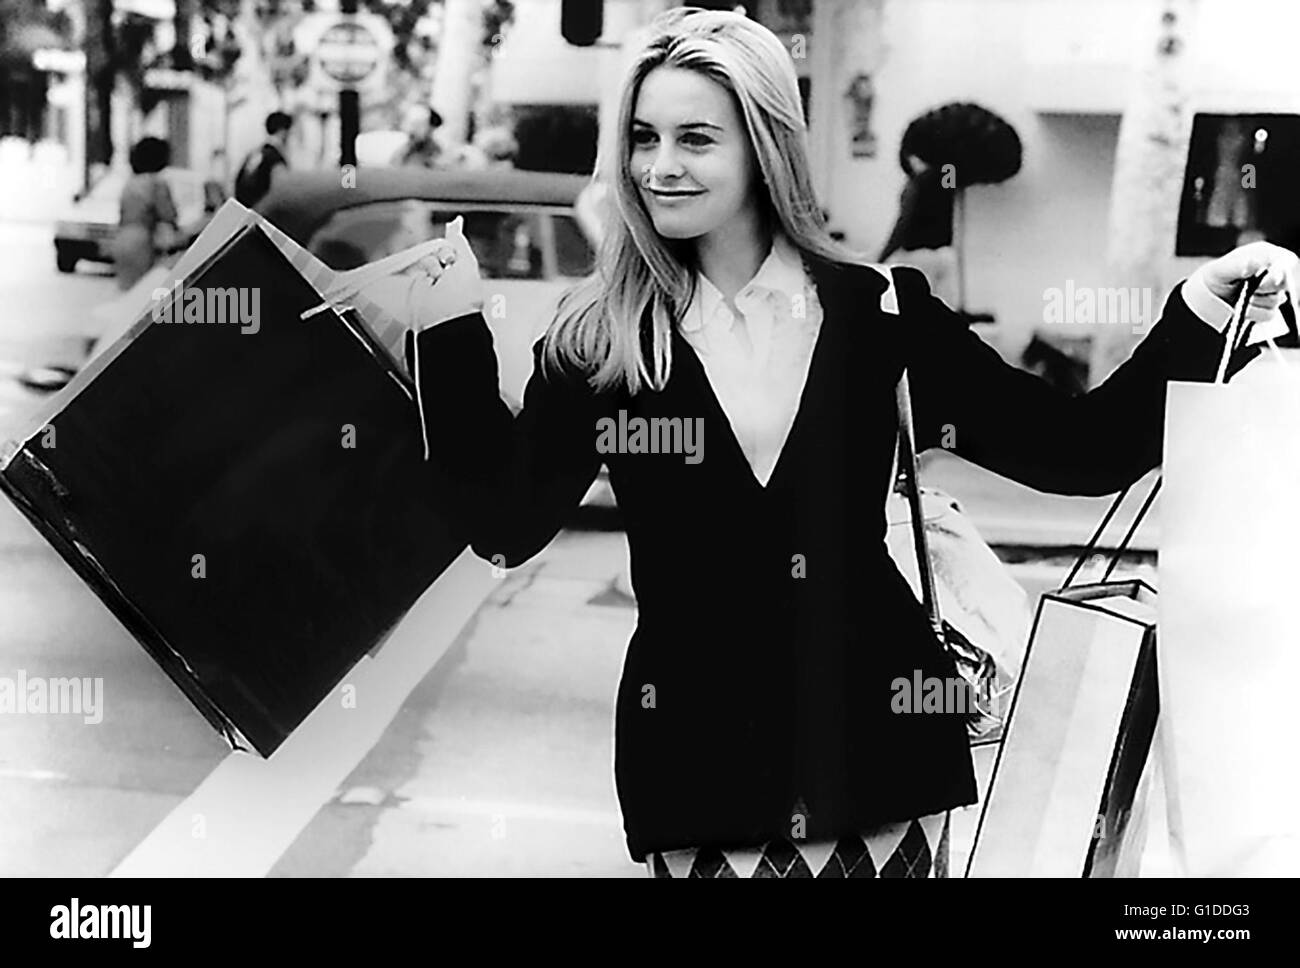 Clueless Black and White Stock Photos & Images - Alamy